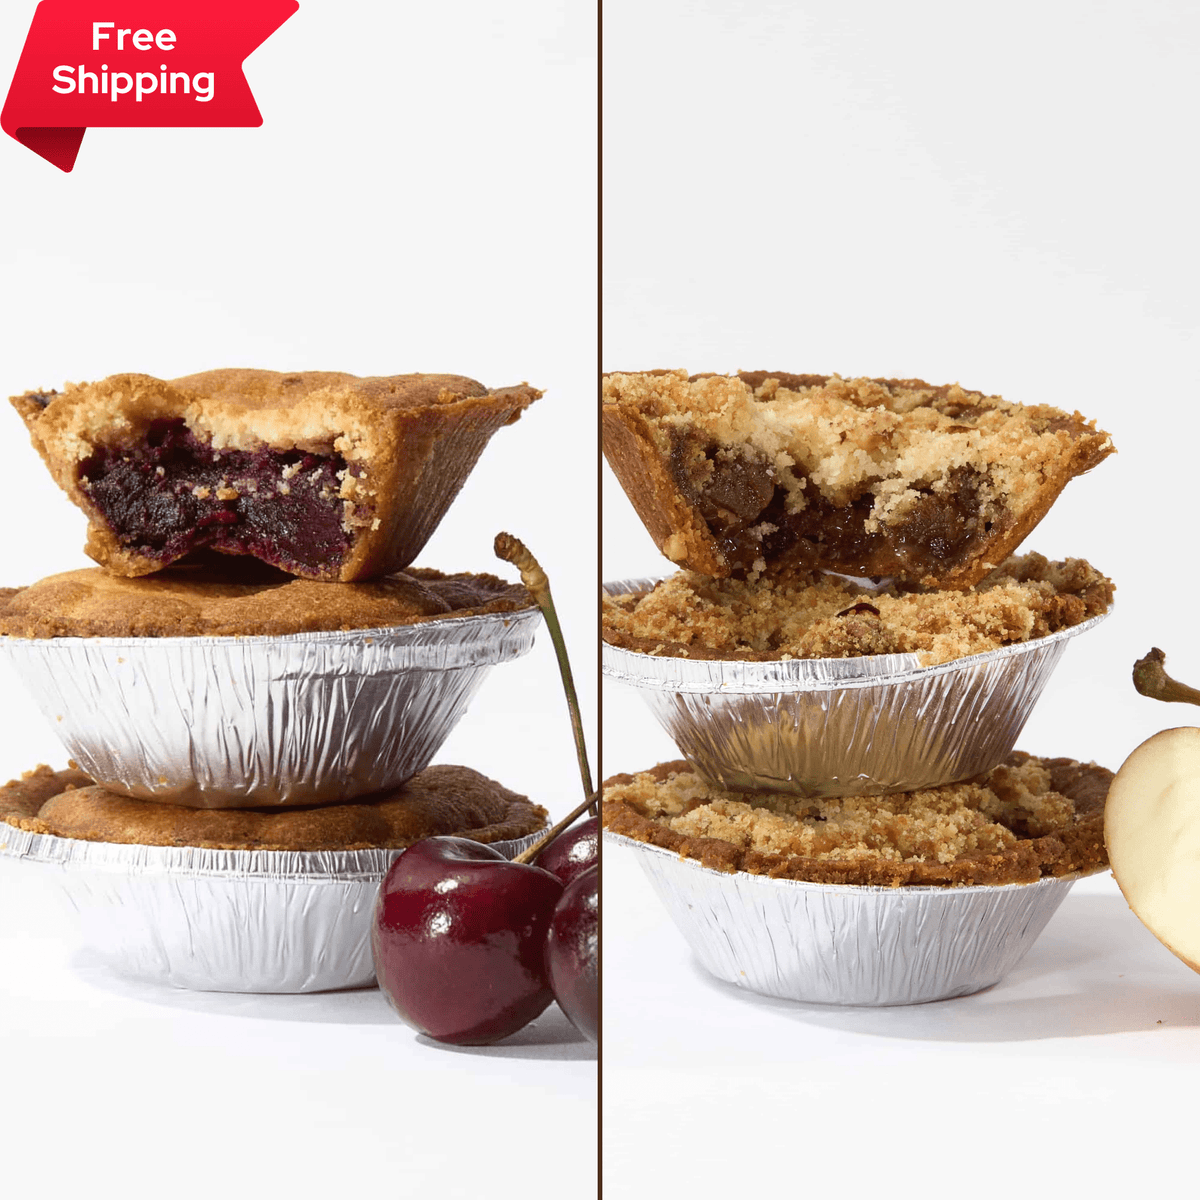 Two types of No Guilt Bakes Low Carb Tart Bundles with one cut open on each side, against a white background, with a &#39;free shipping&#39; label in the top left corner.